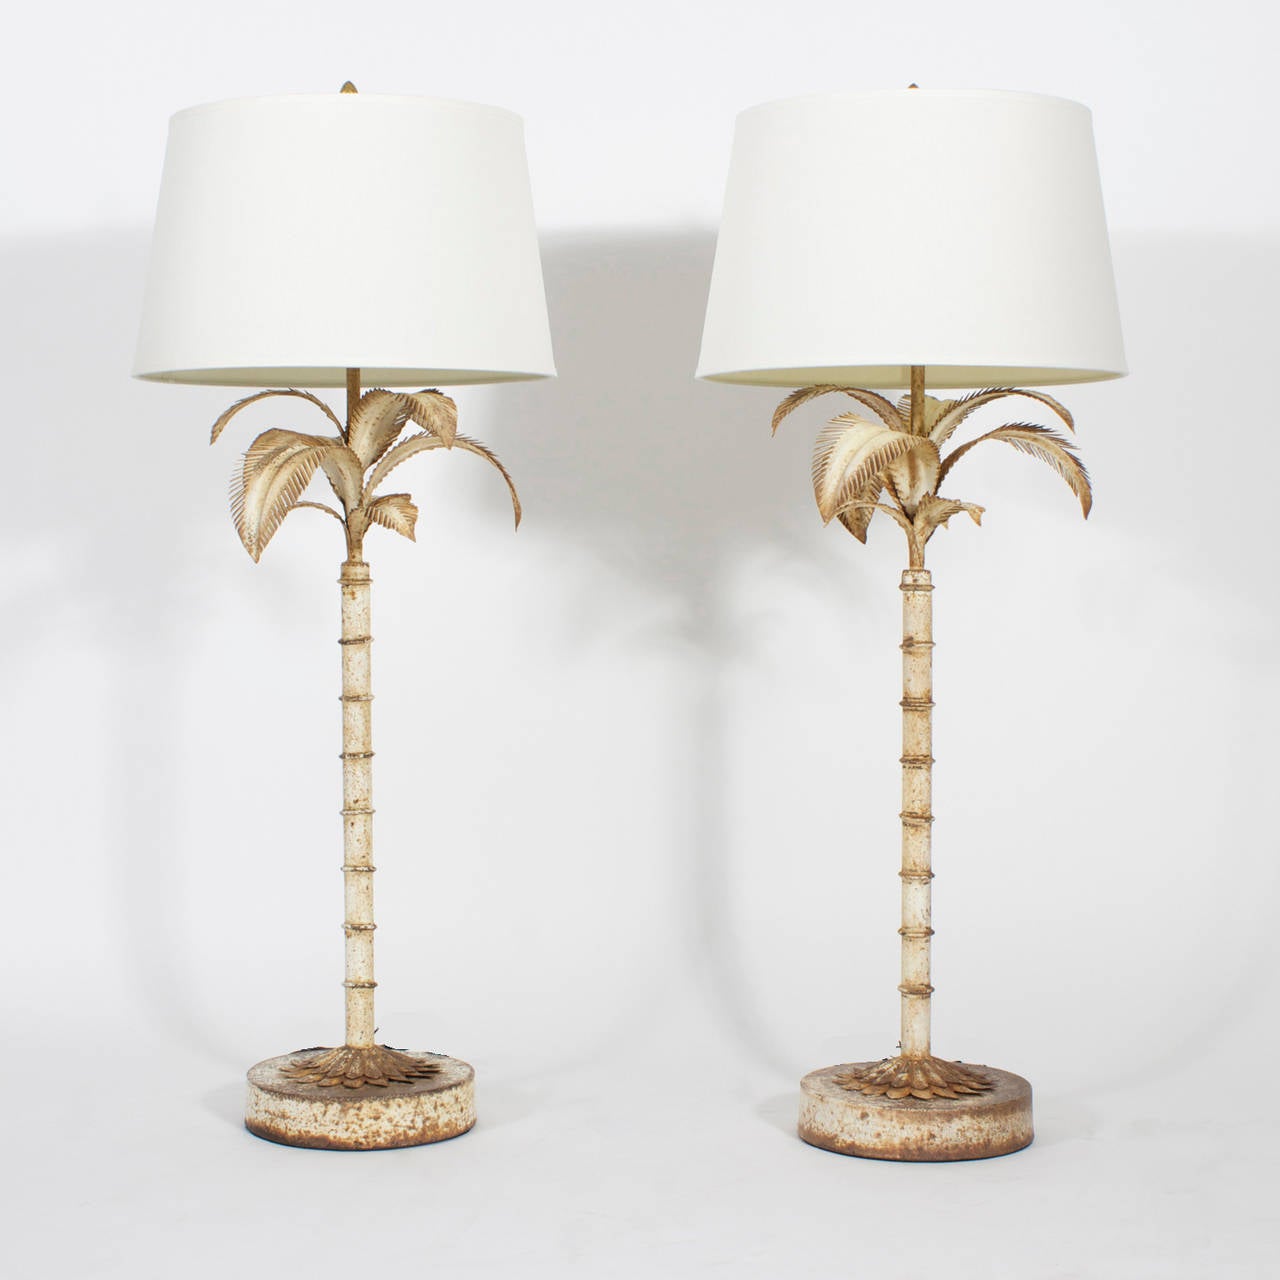 A pair of Italian tole palm tree table lamps with charming old world oxidation on white paint, discretely outlining the lamps. Classic form and bold scale. Only nature can create this alluring decorative look.

